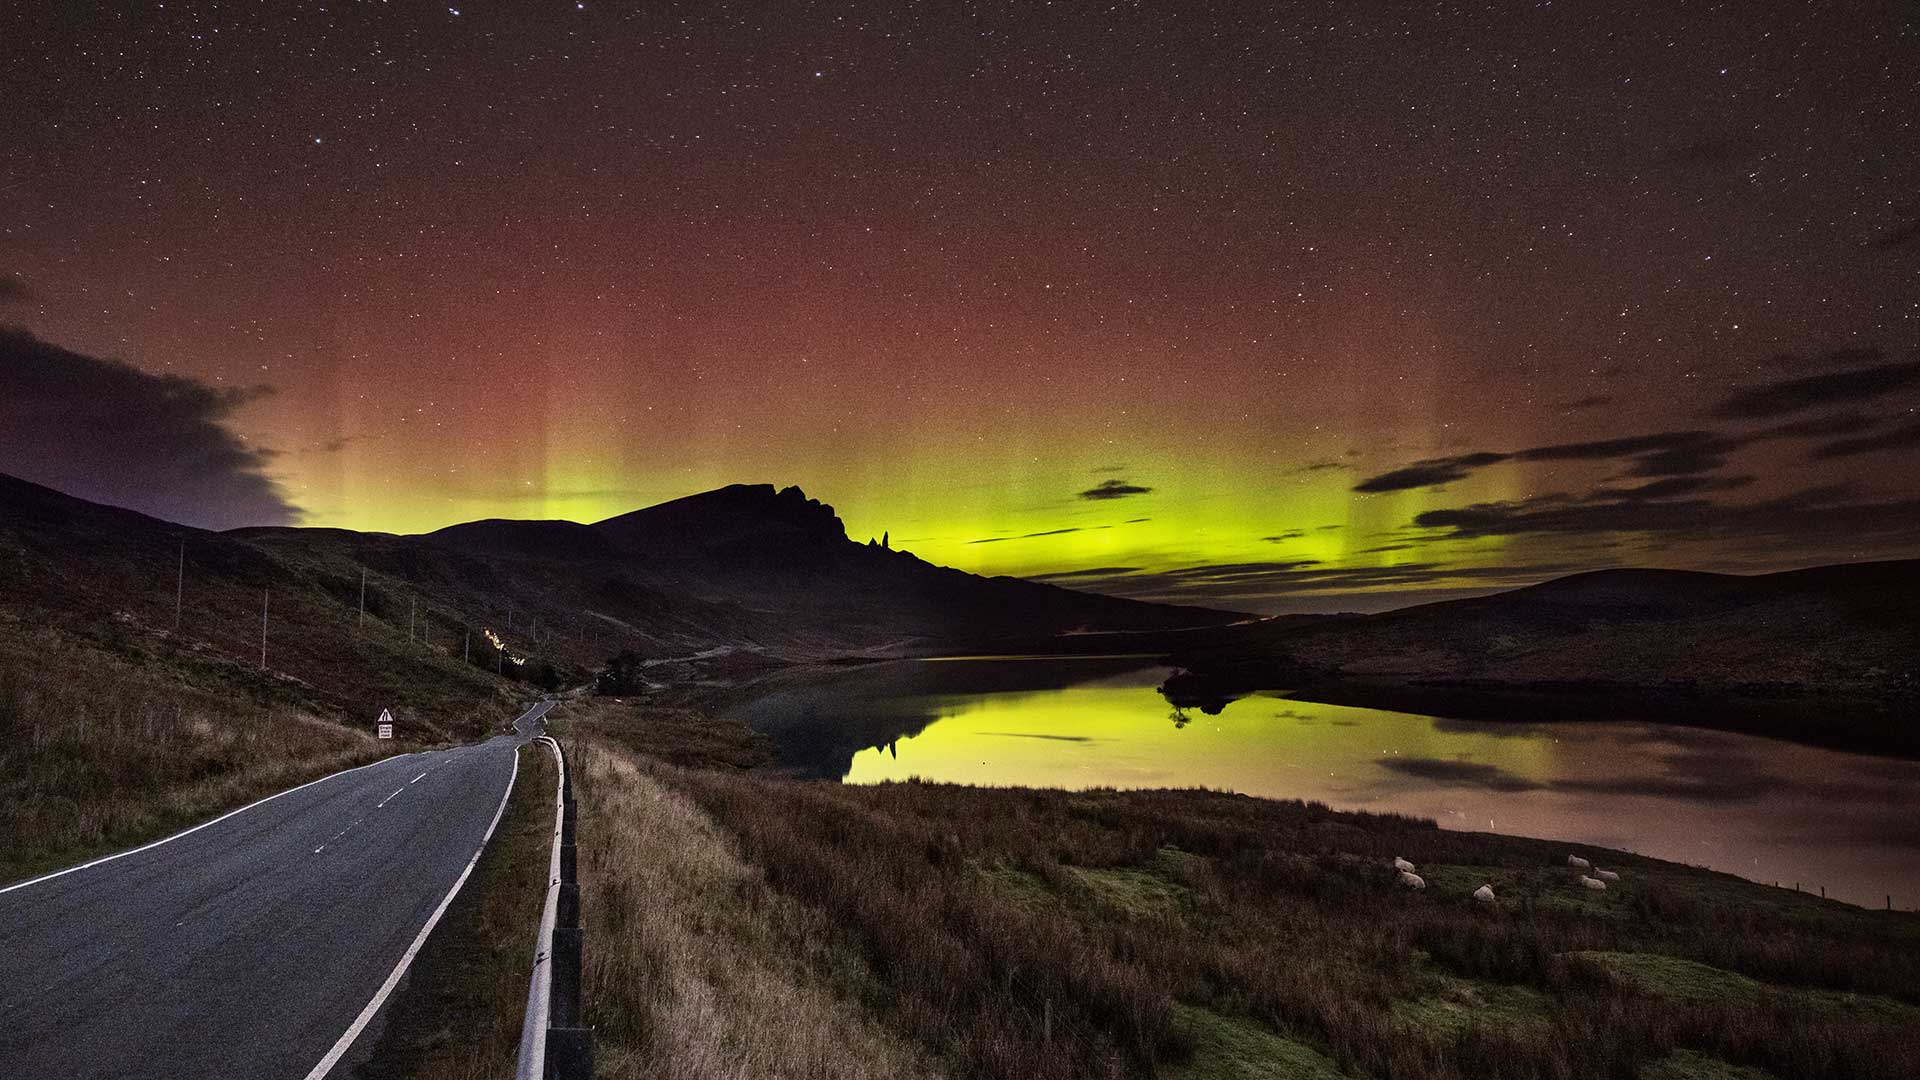 Where & When to See the Northern Lights in Scotland